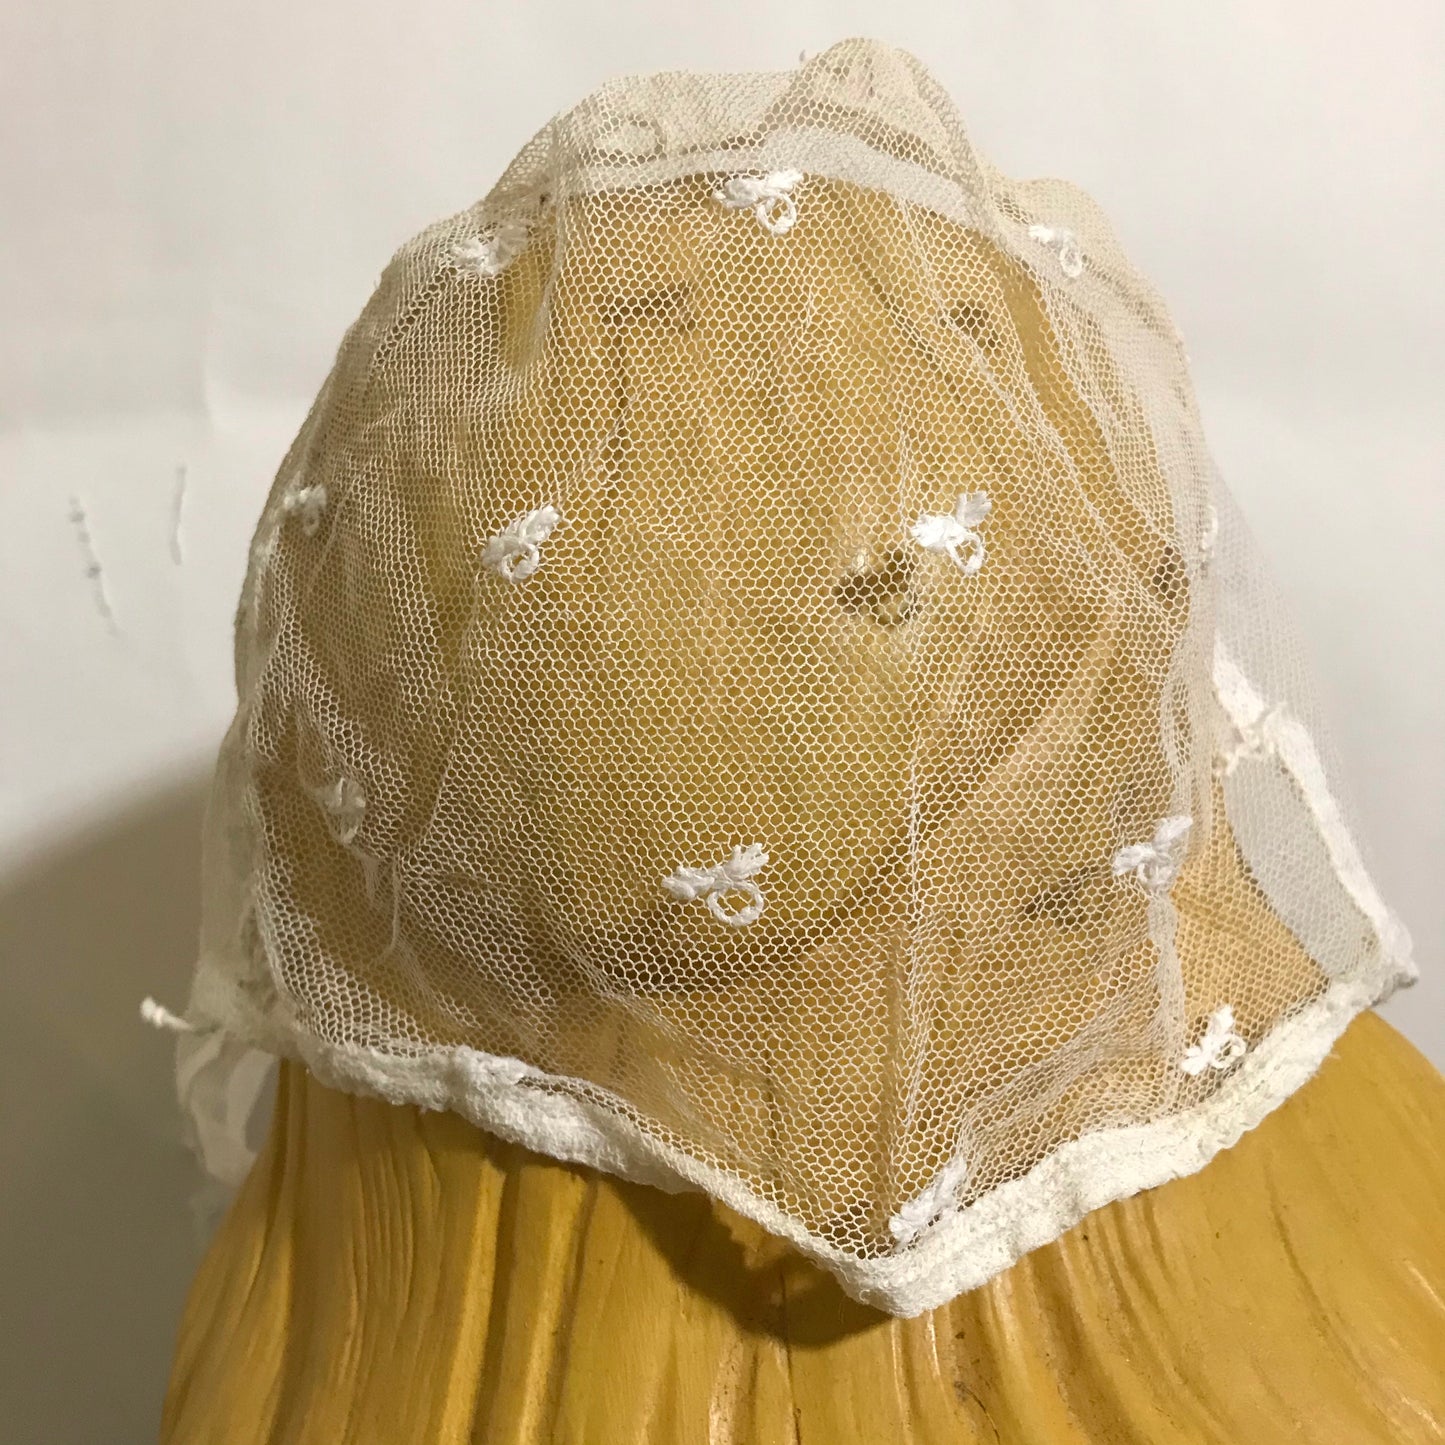 Ivory Embroidered Netting Cap Hat circa 1850